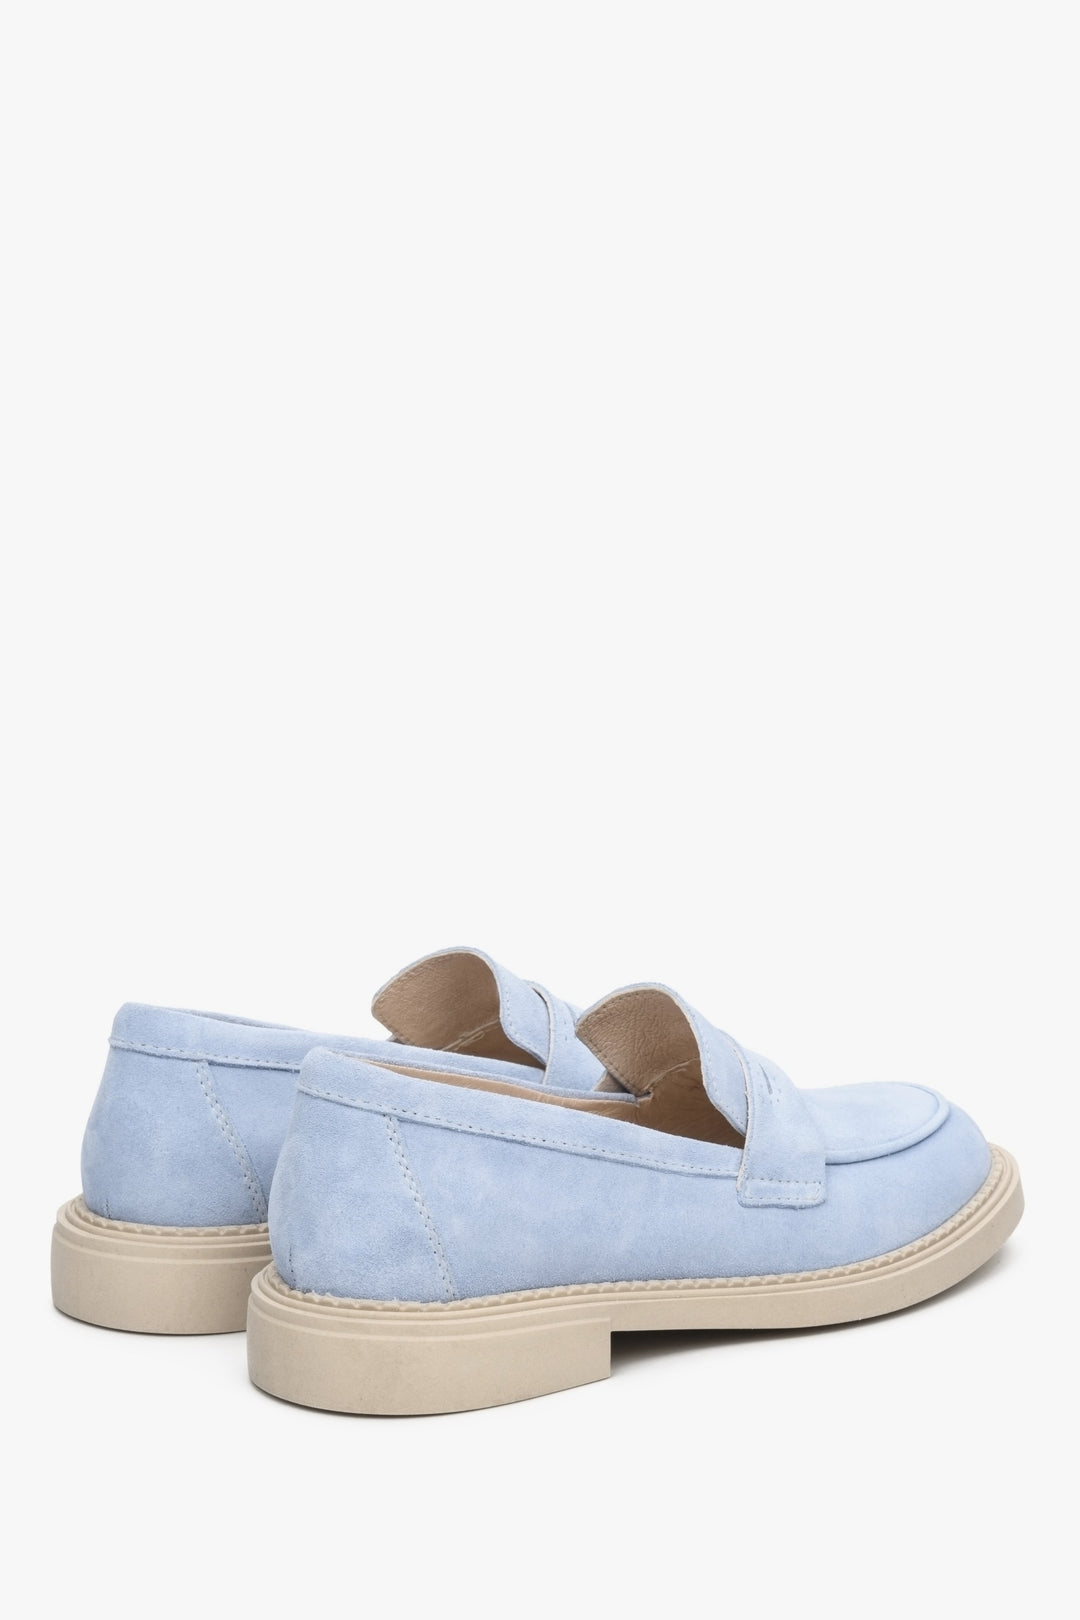 Women's suede moccasins in light blue Estro - a close-up of the heel.